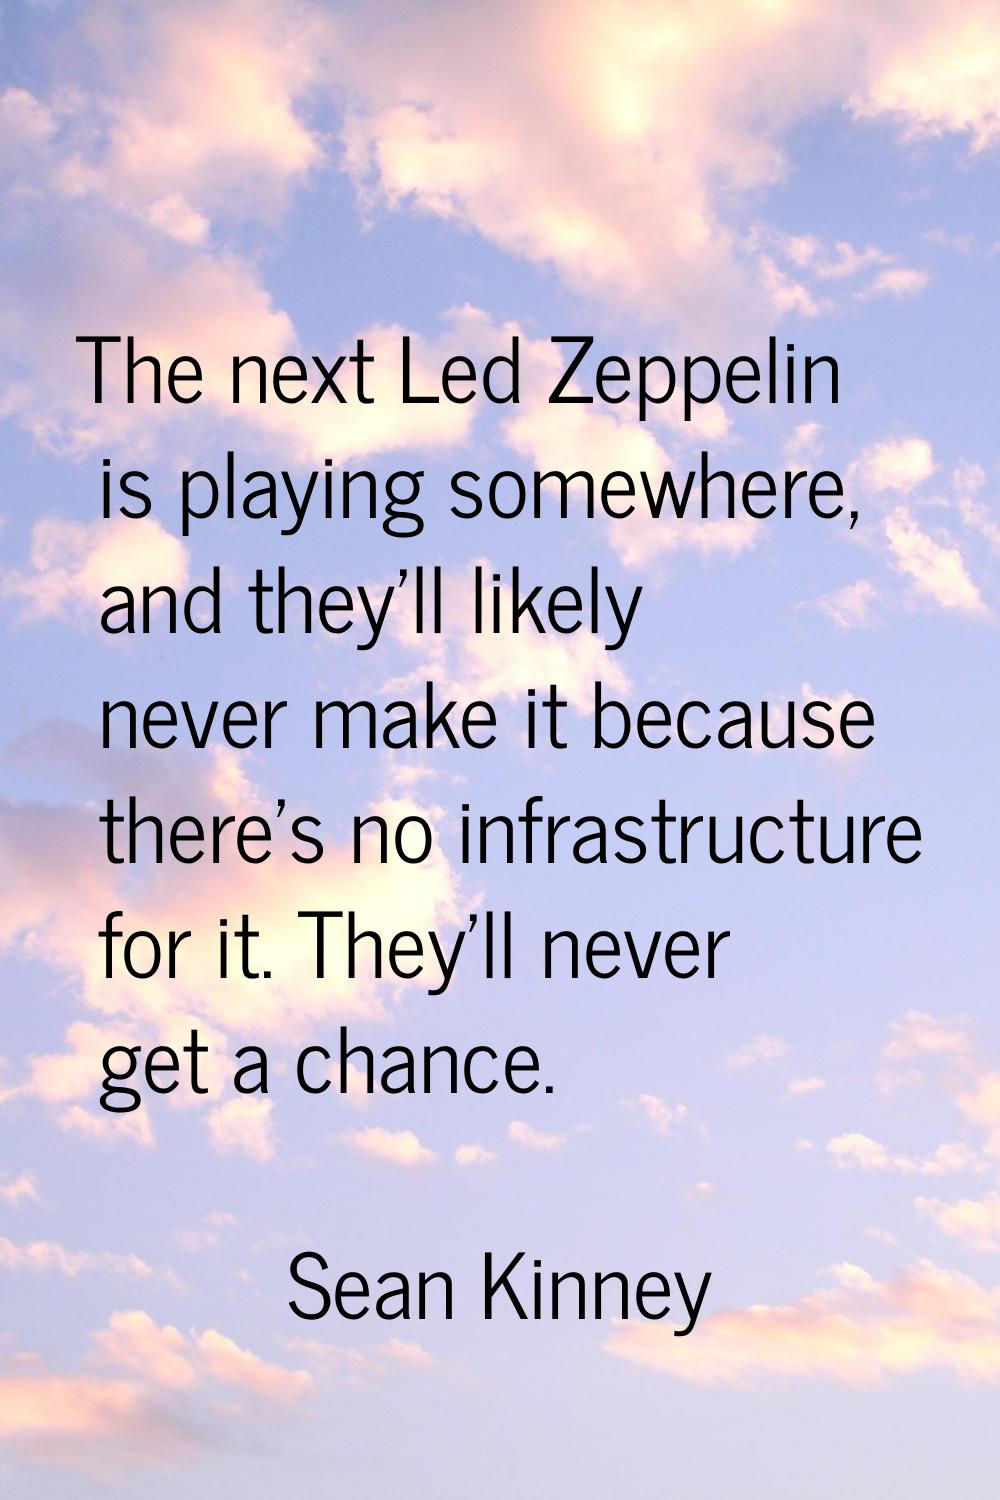 The next Led Zeppelin is playing somewhere, and they'll likely never make it because there's no inf